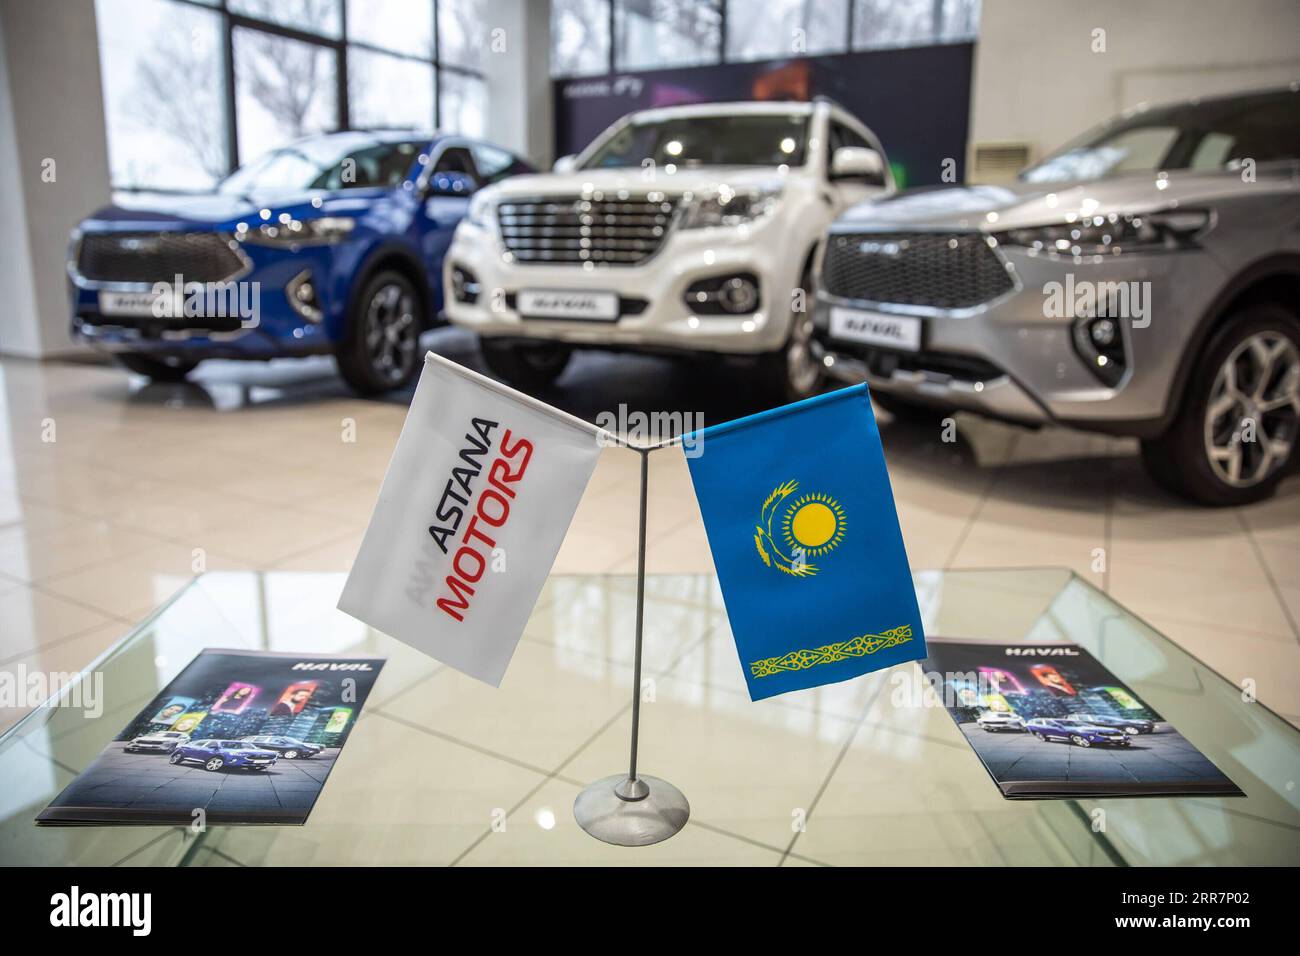 210401 -- ALMATY, April 1, 2021 -- Photo taken on April 1, 2021 shows HAVAL cars at a dealer shop in Almaty, Kazakhstan. Great Wall Motor Co., Ltd. s HAVAL brand entered the Kazakhstan market on thursday, three main models of crossover vehicles F7, F7x and off-road vehicle H9 officially began the sales to Kazakhstan residents in Almaty. /Handout via Xinhua KAZAKHSTAN-ALMATY-HAVAL-SALE AstanaxMotors PUBLICATIONxNOTxINxCHN Stock Photo